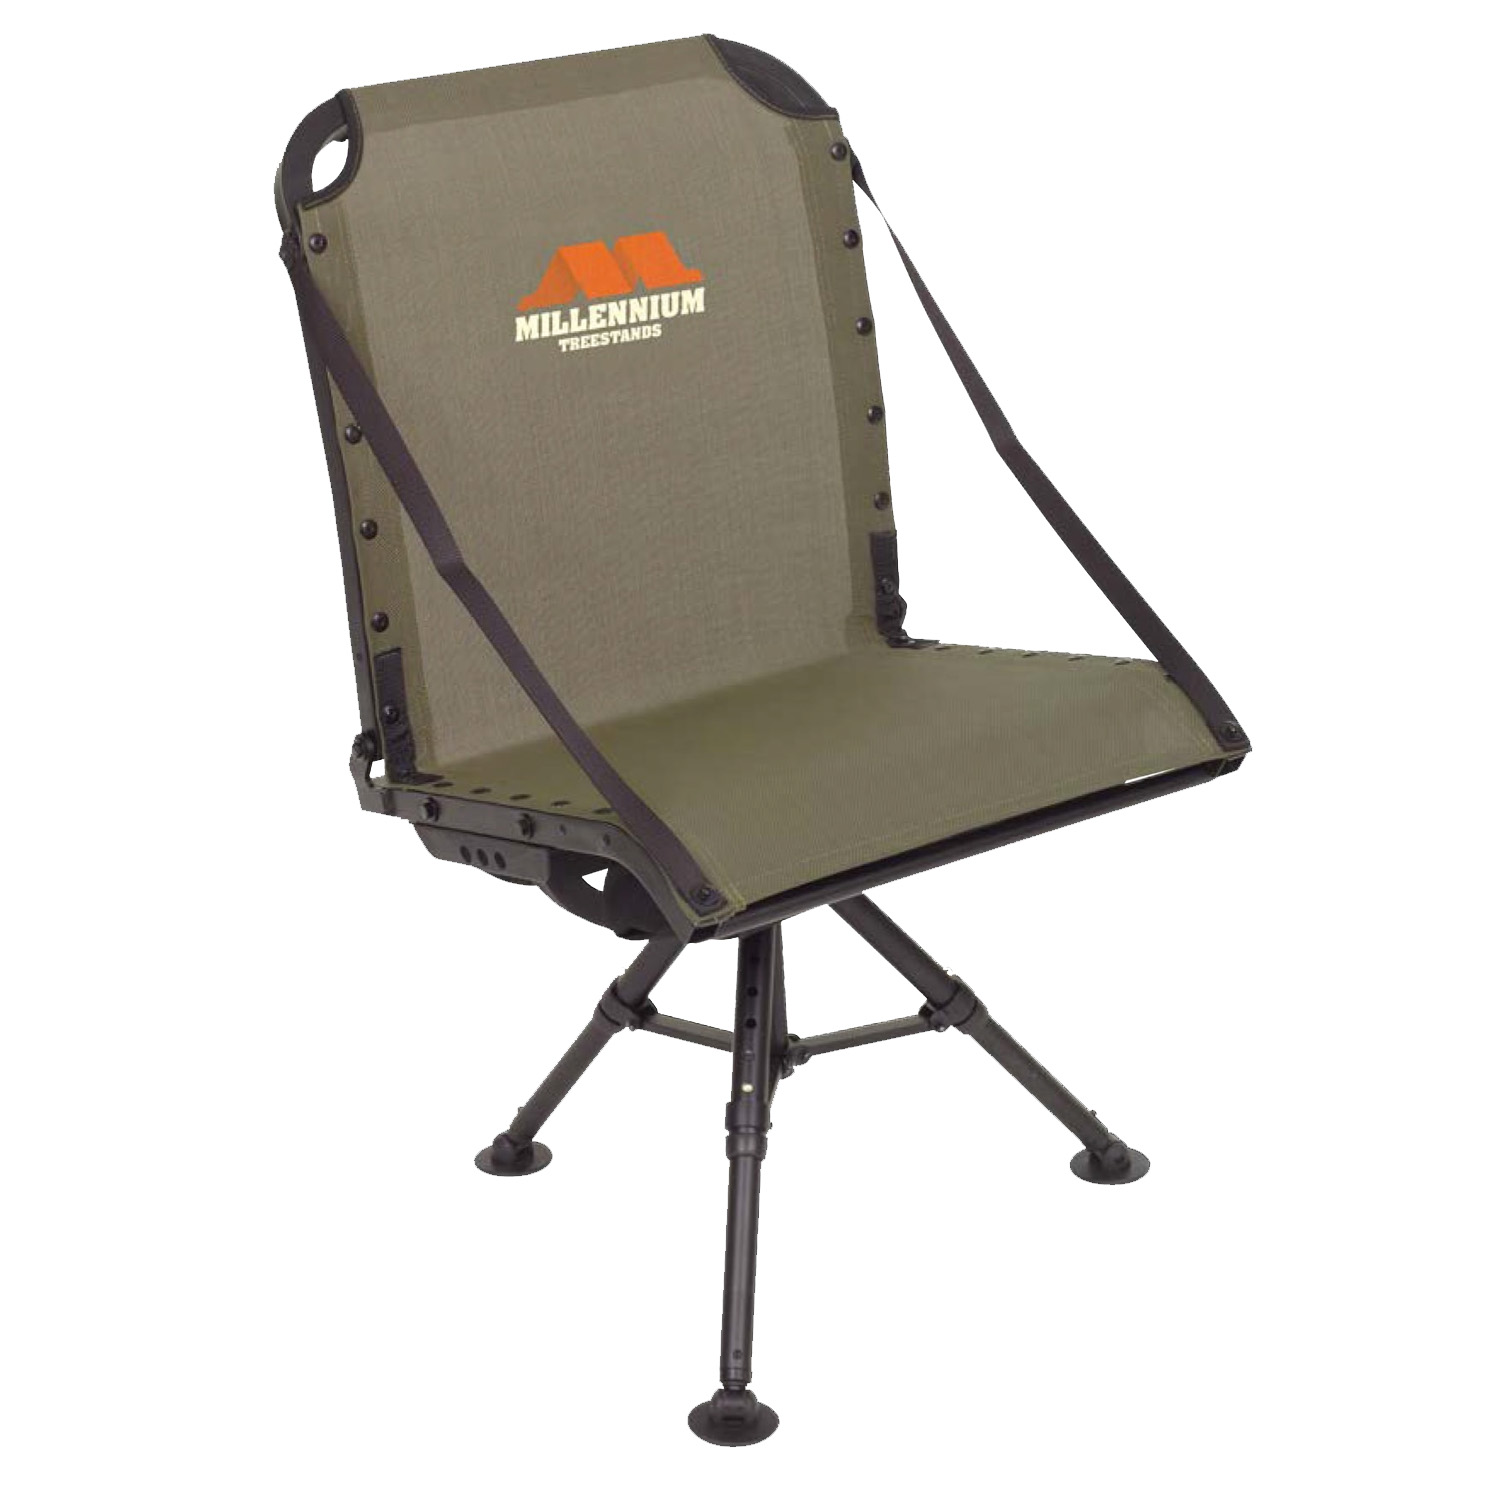 PRIMOS PS60085 Double Bull Tri Stool Hunting Chair in Truth Camo NEW 